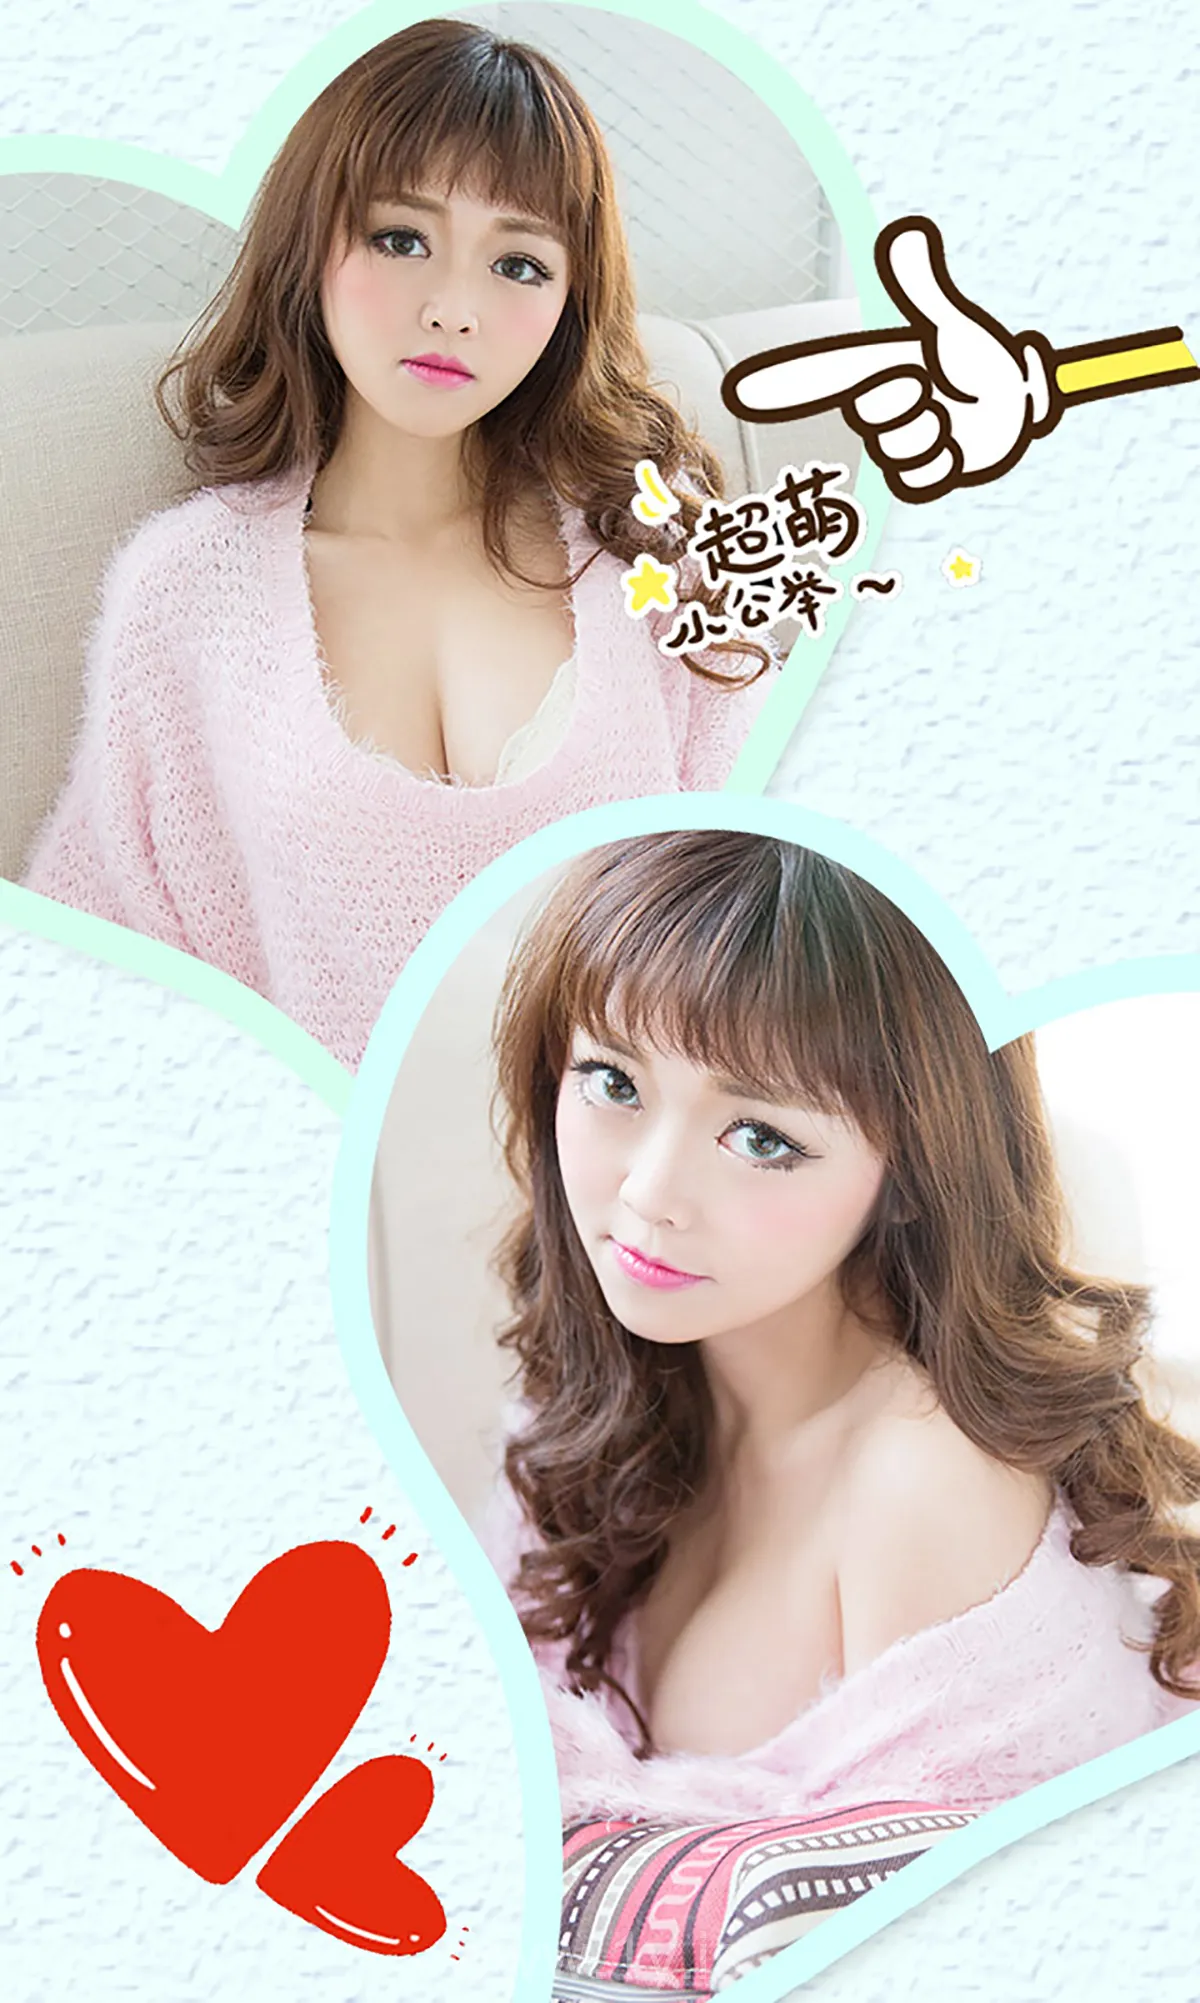 UGIRLS NO.306 Adorable & Hot Chinese Cougar Bunny豆蔻之颜